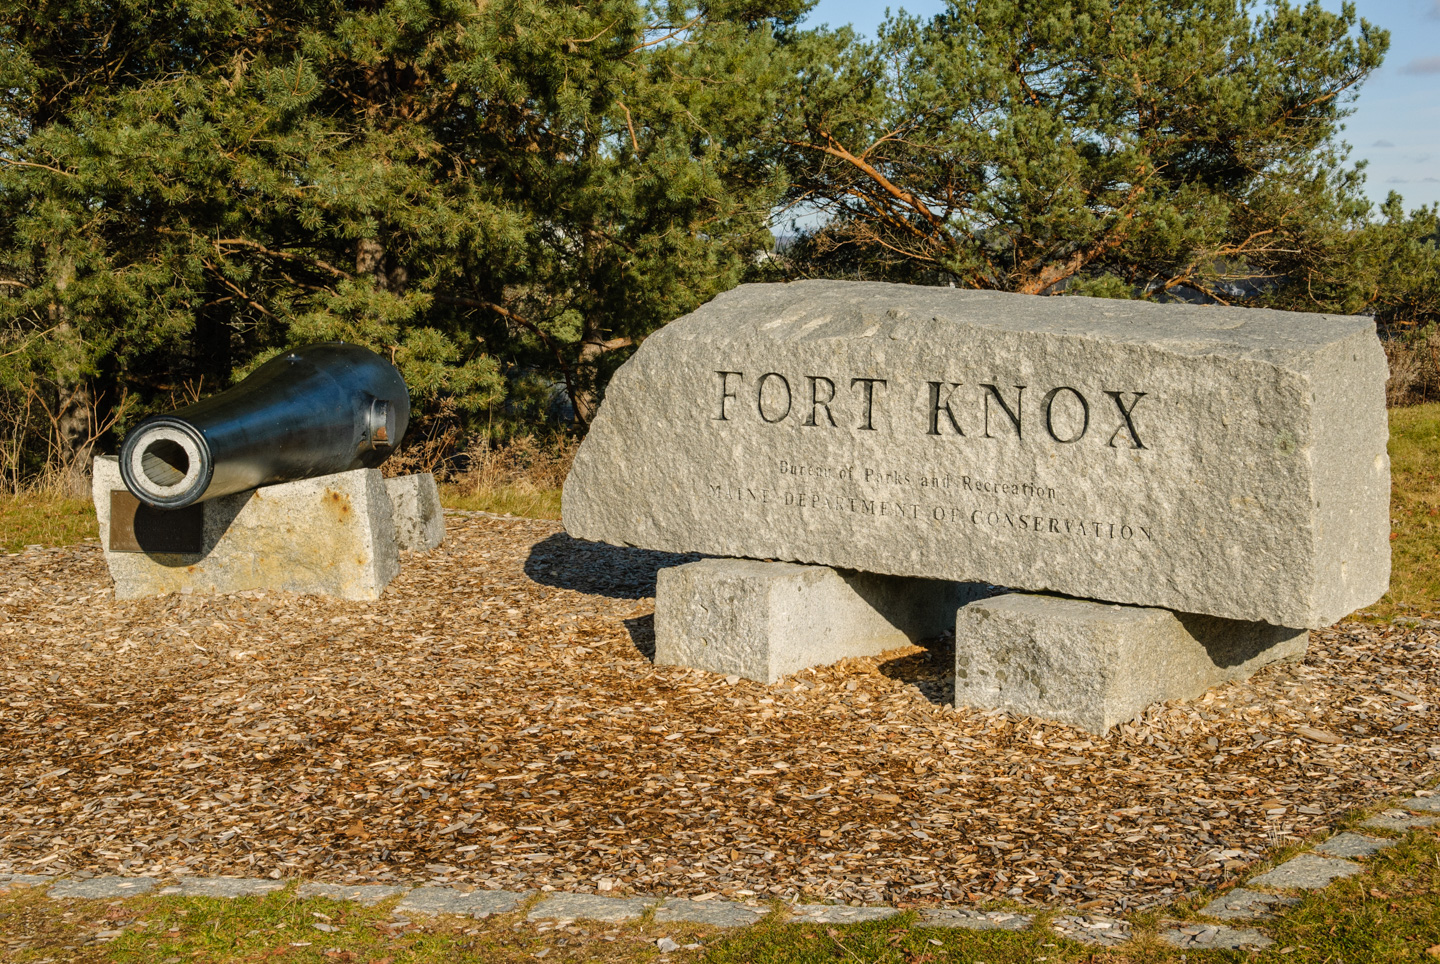 Sign of Fort Knox, Maine